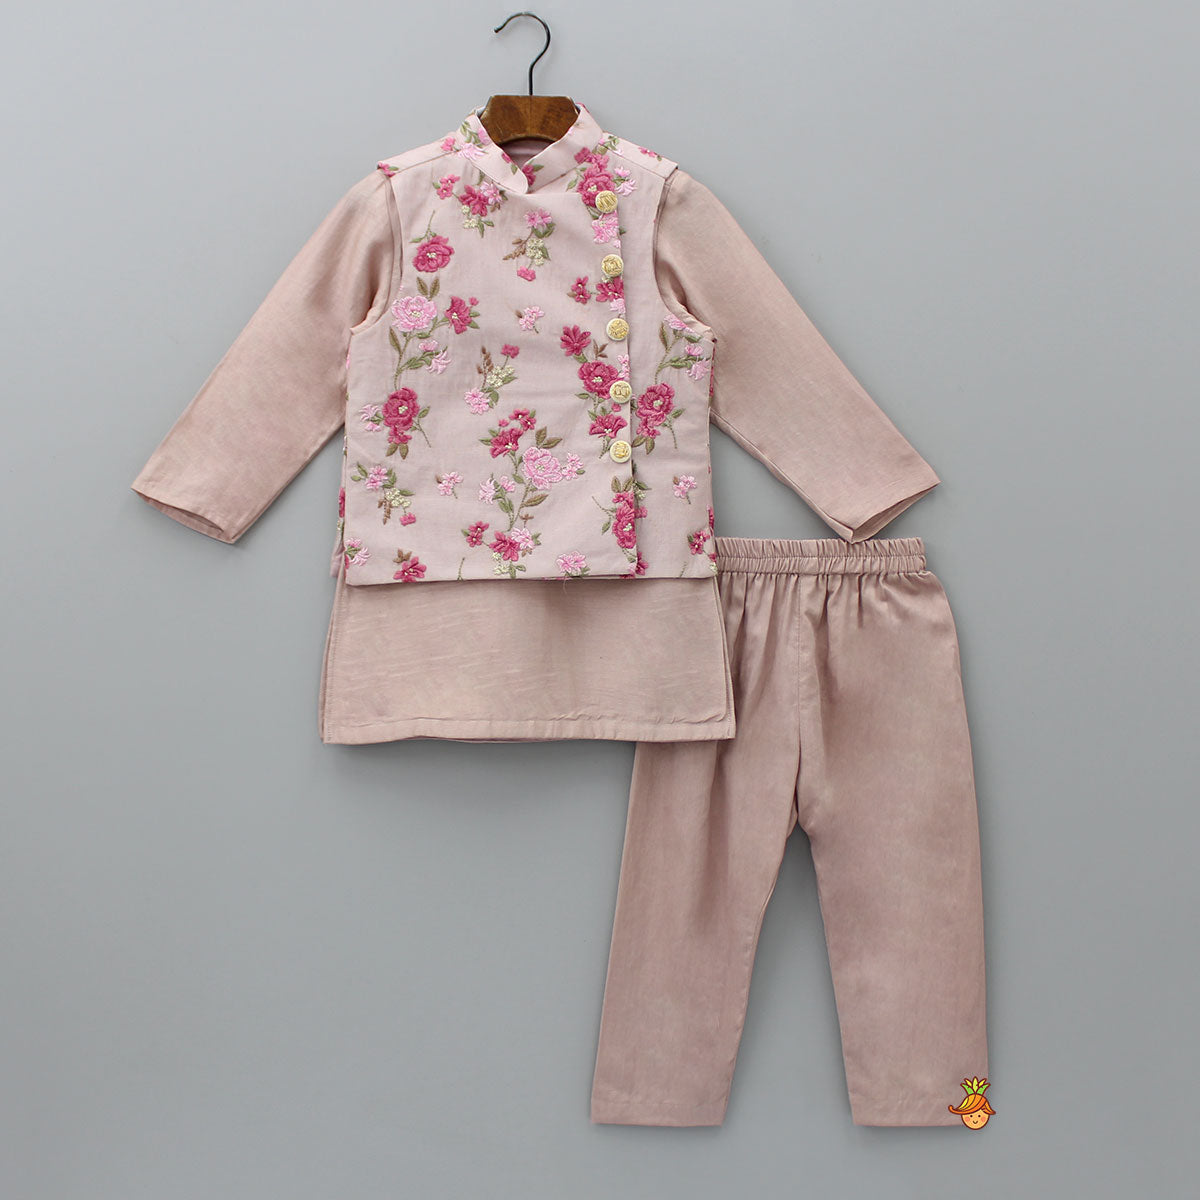 Ethnic Kurta With Pink Floral Embroidered Jacket And Pyjama